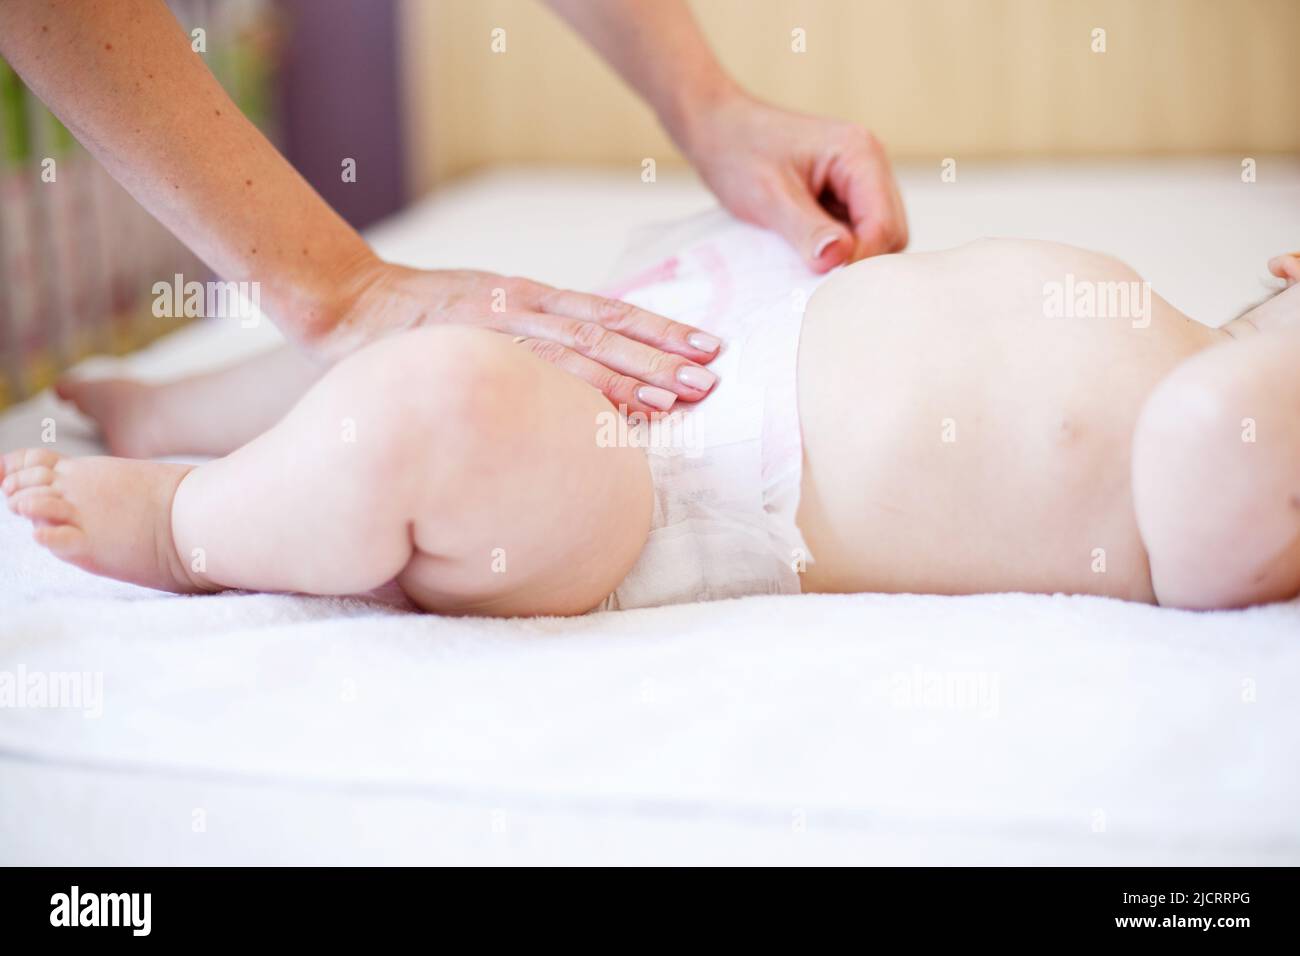 Caring young mother changing the diaper of her baby at home Stock Photo